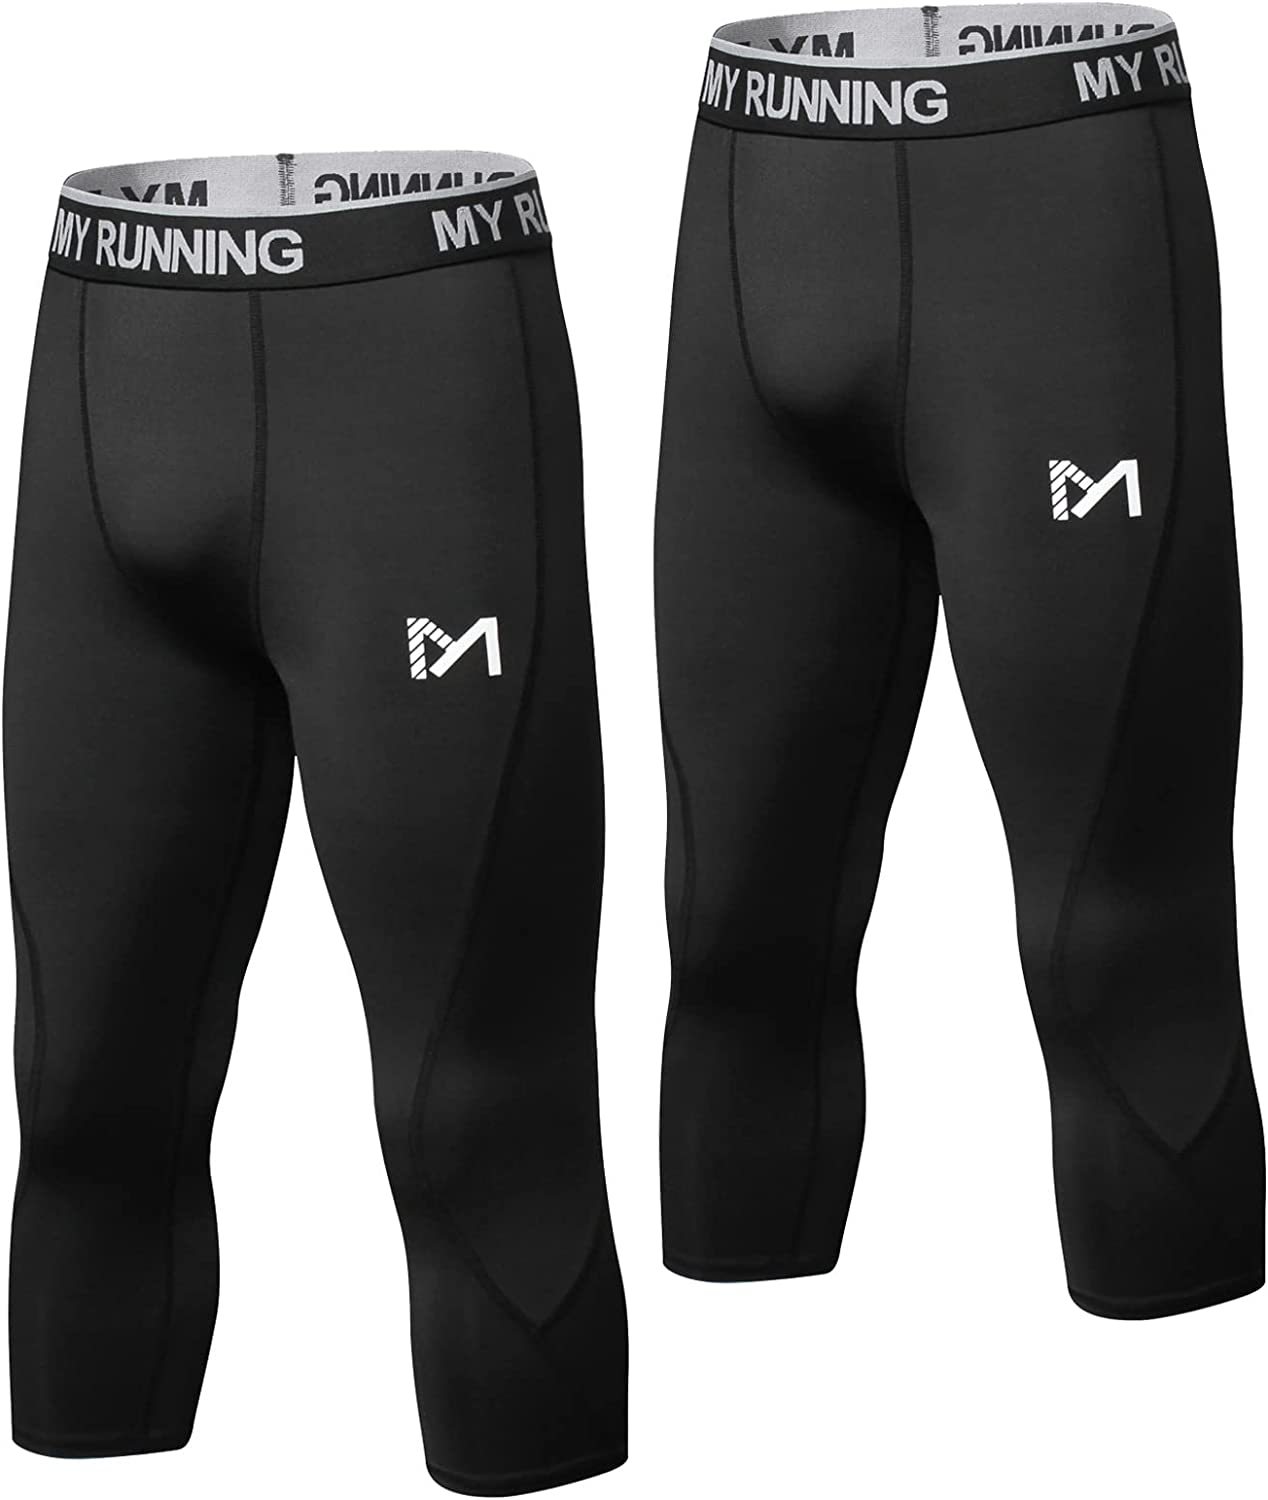 Men's 3/4 Compression Pants Sports Workout Running Tights Leggings